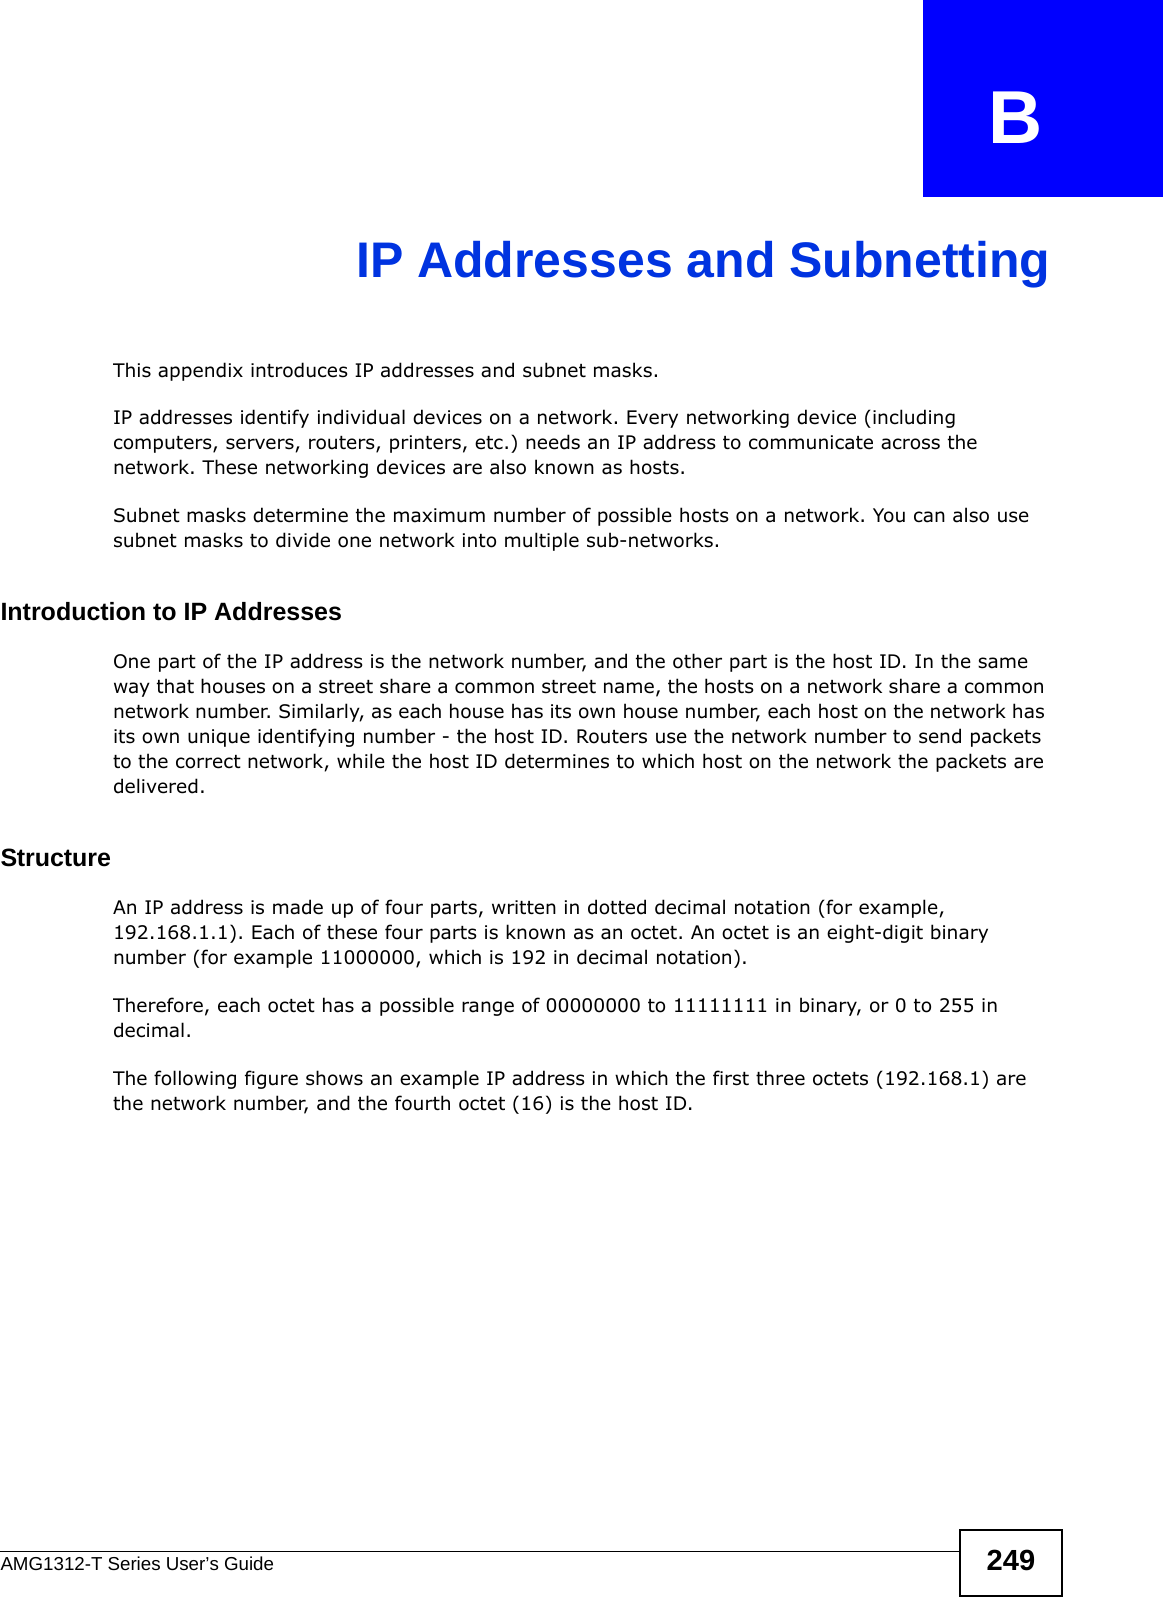 AMG1312-T Series User’s Guide 249APPENDIX   BIP Addresses and SubnettingThis appendix introduces IP addresses and subnet masks. IP addresses identify individual devices on a network. Every networking device (including computers, servers, routers, printers, etc.) needs an IP address to communicate across the network. These networking devices are also known as hosts.Subnet masks determine the maximum number of possible hosts on a network. You can also use subnet masks to divide one network into multiple sub-networks.Introduction to IP AddressesOne part of the IP address is the network number, and the other part is the host ID. In the same way that houses on a street share a common street name, the hosts on a network share a common network number. Similarly, as each house has its own house number, each host on the network has its own unique identifying number - the host ID. Routers use the network number to send packets to the correct network, while the host ID determines to which host on the network the packets are delivered.StructureAn IP address is made up of four parts, written in dotted decimal notation (for example, 192.168.1.1). Each of these four parts is known as an octet. An octet is an eight-digit binary number (for example 11000000, which is 192 in decimal notation). Therefore, each octet has a possible range of 00000000 to 11111111 in binary, or 0 to 255 in decimal.The following figure shows an example IP address in which the first three octets (192.168.1) are the network number, and the fourth octet (16) is the host ID.